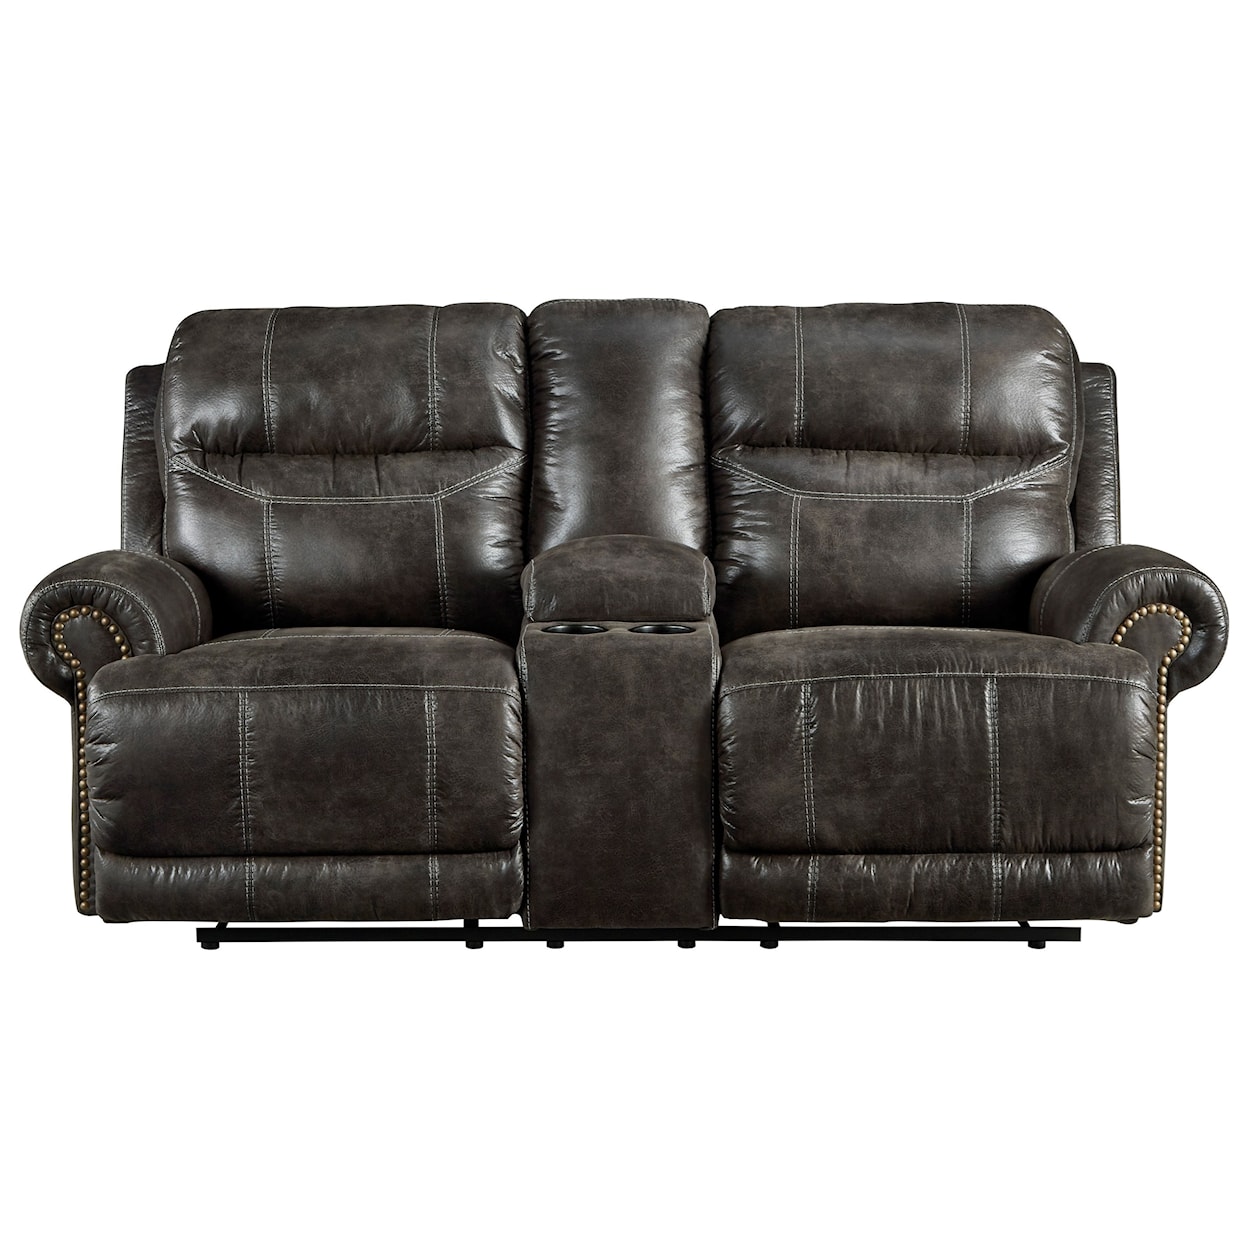 Michael Alan Select Grearview Power Reclining Loveseat with Console